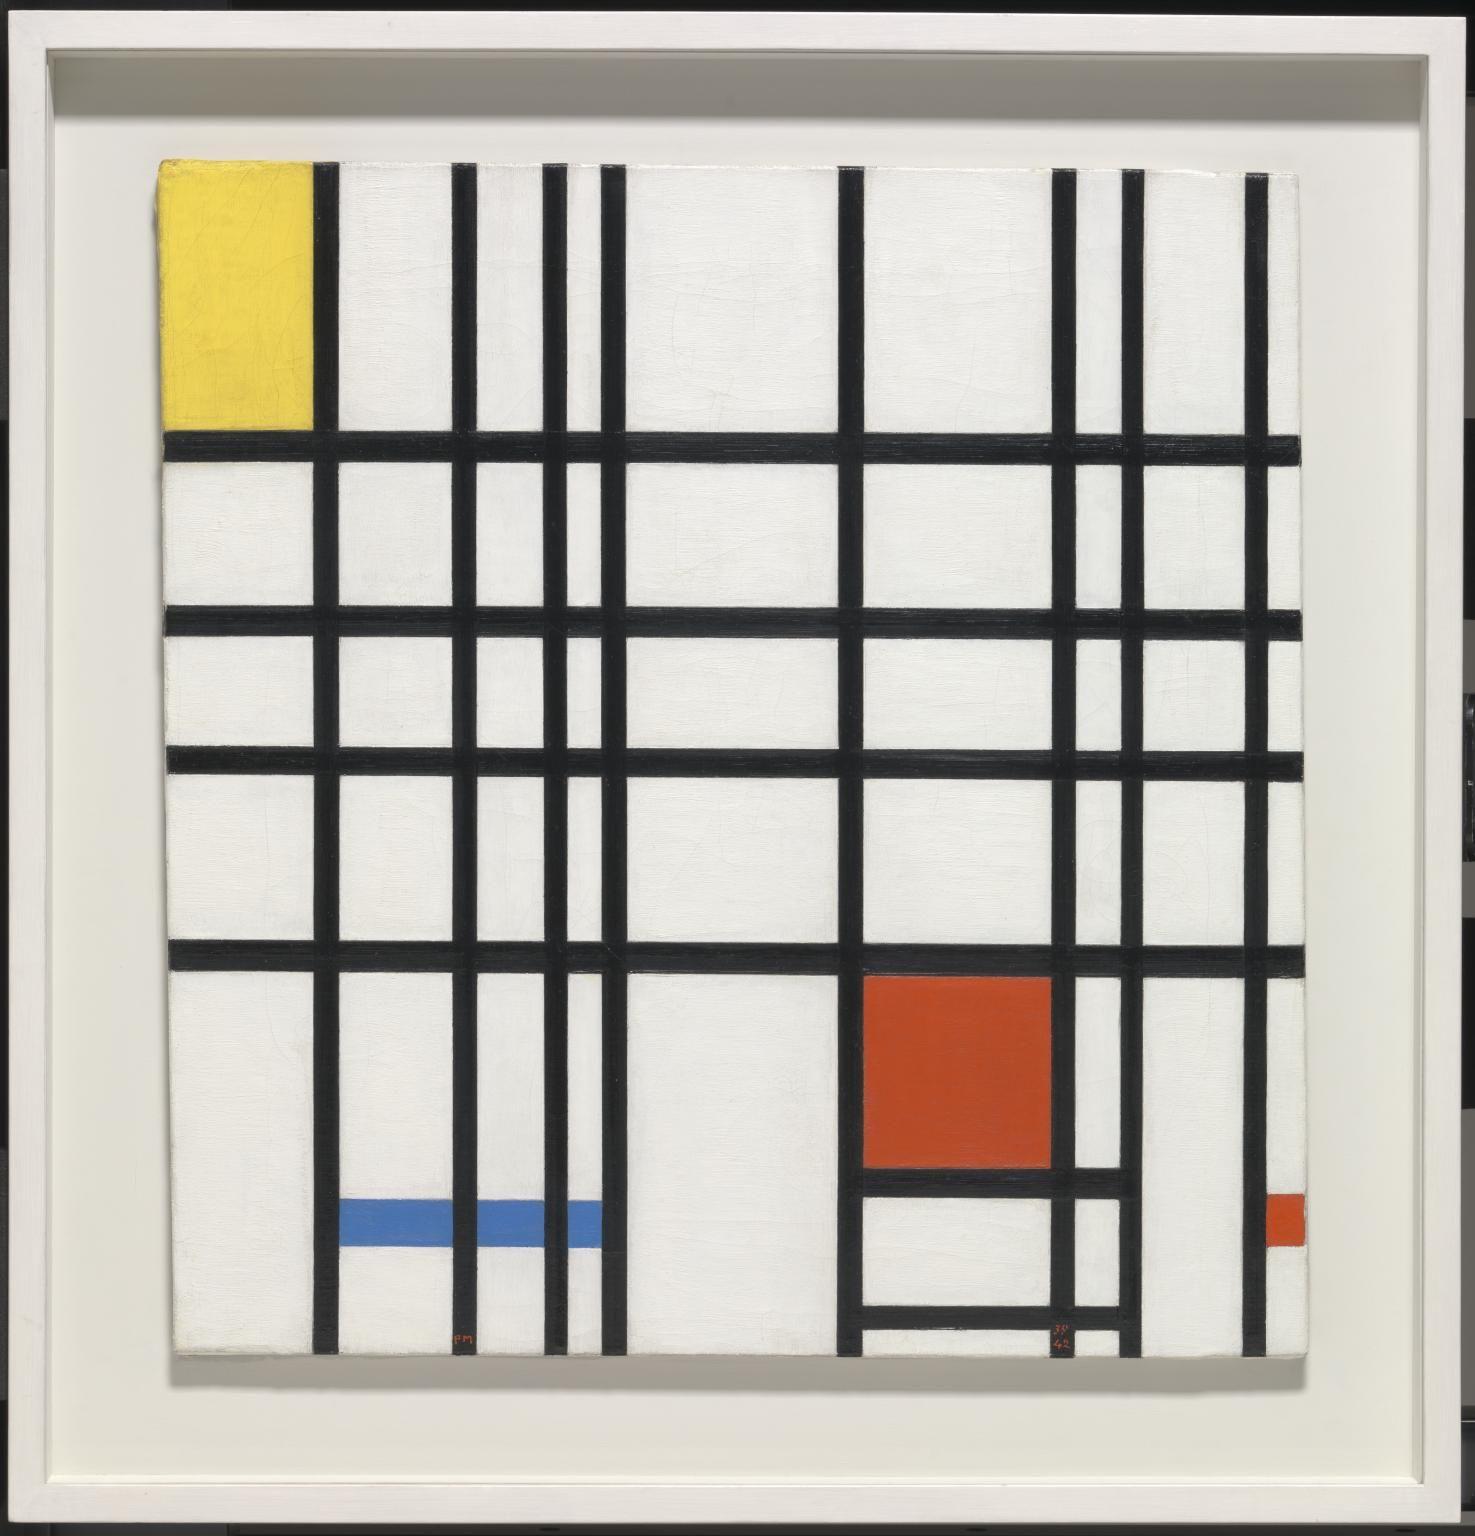 Red and Blue Square Logo - Composition with Yellow, Blue and Red', Piet Mondrian, 1937-42 | Tate